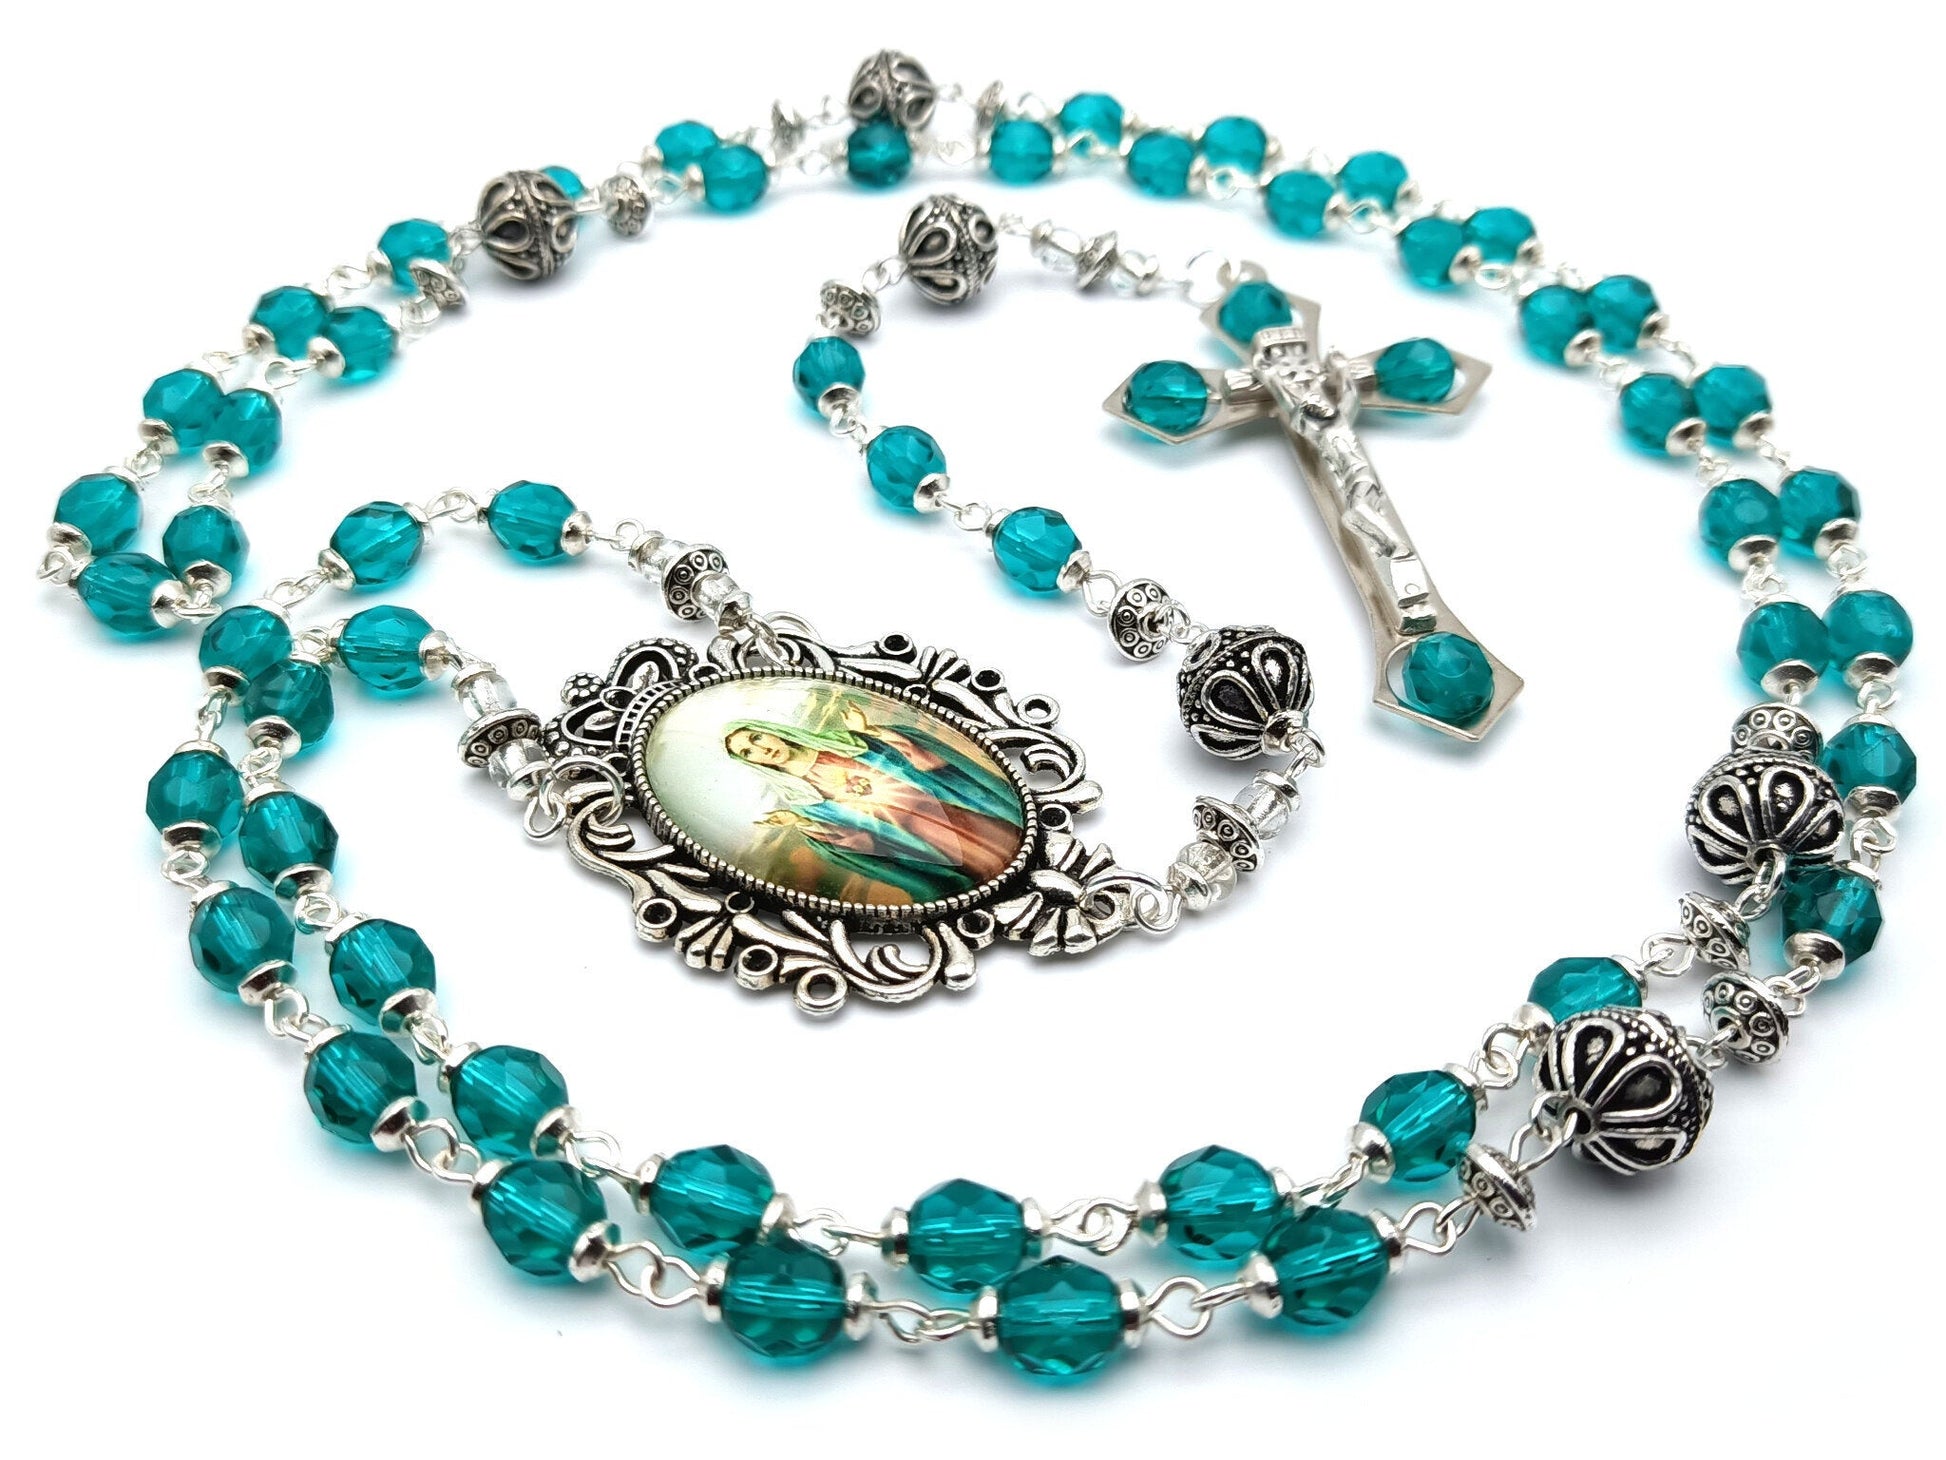 Immaculate Heart of Mary unique rosary beads with aqua crystal and silver beads, silver and crystal crucifix, and silver picture centre medal.